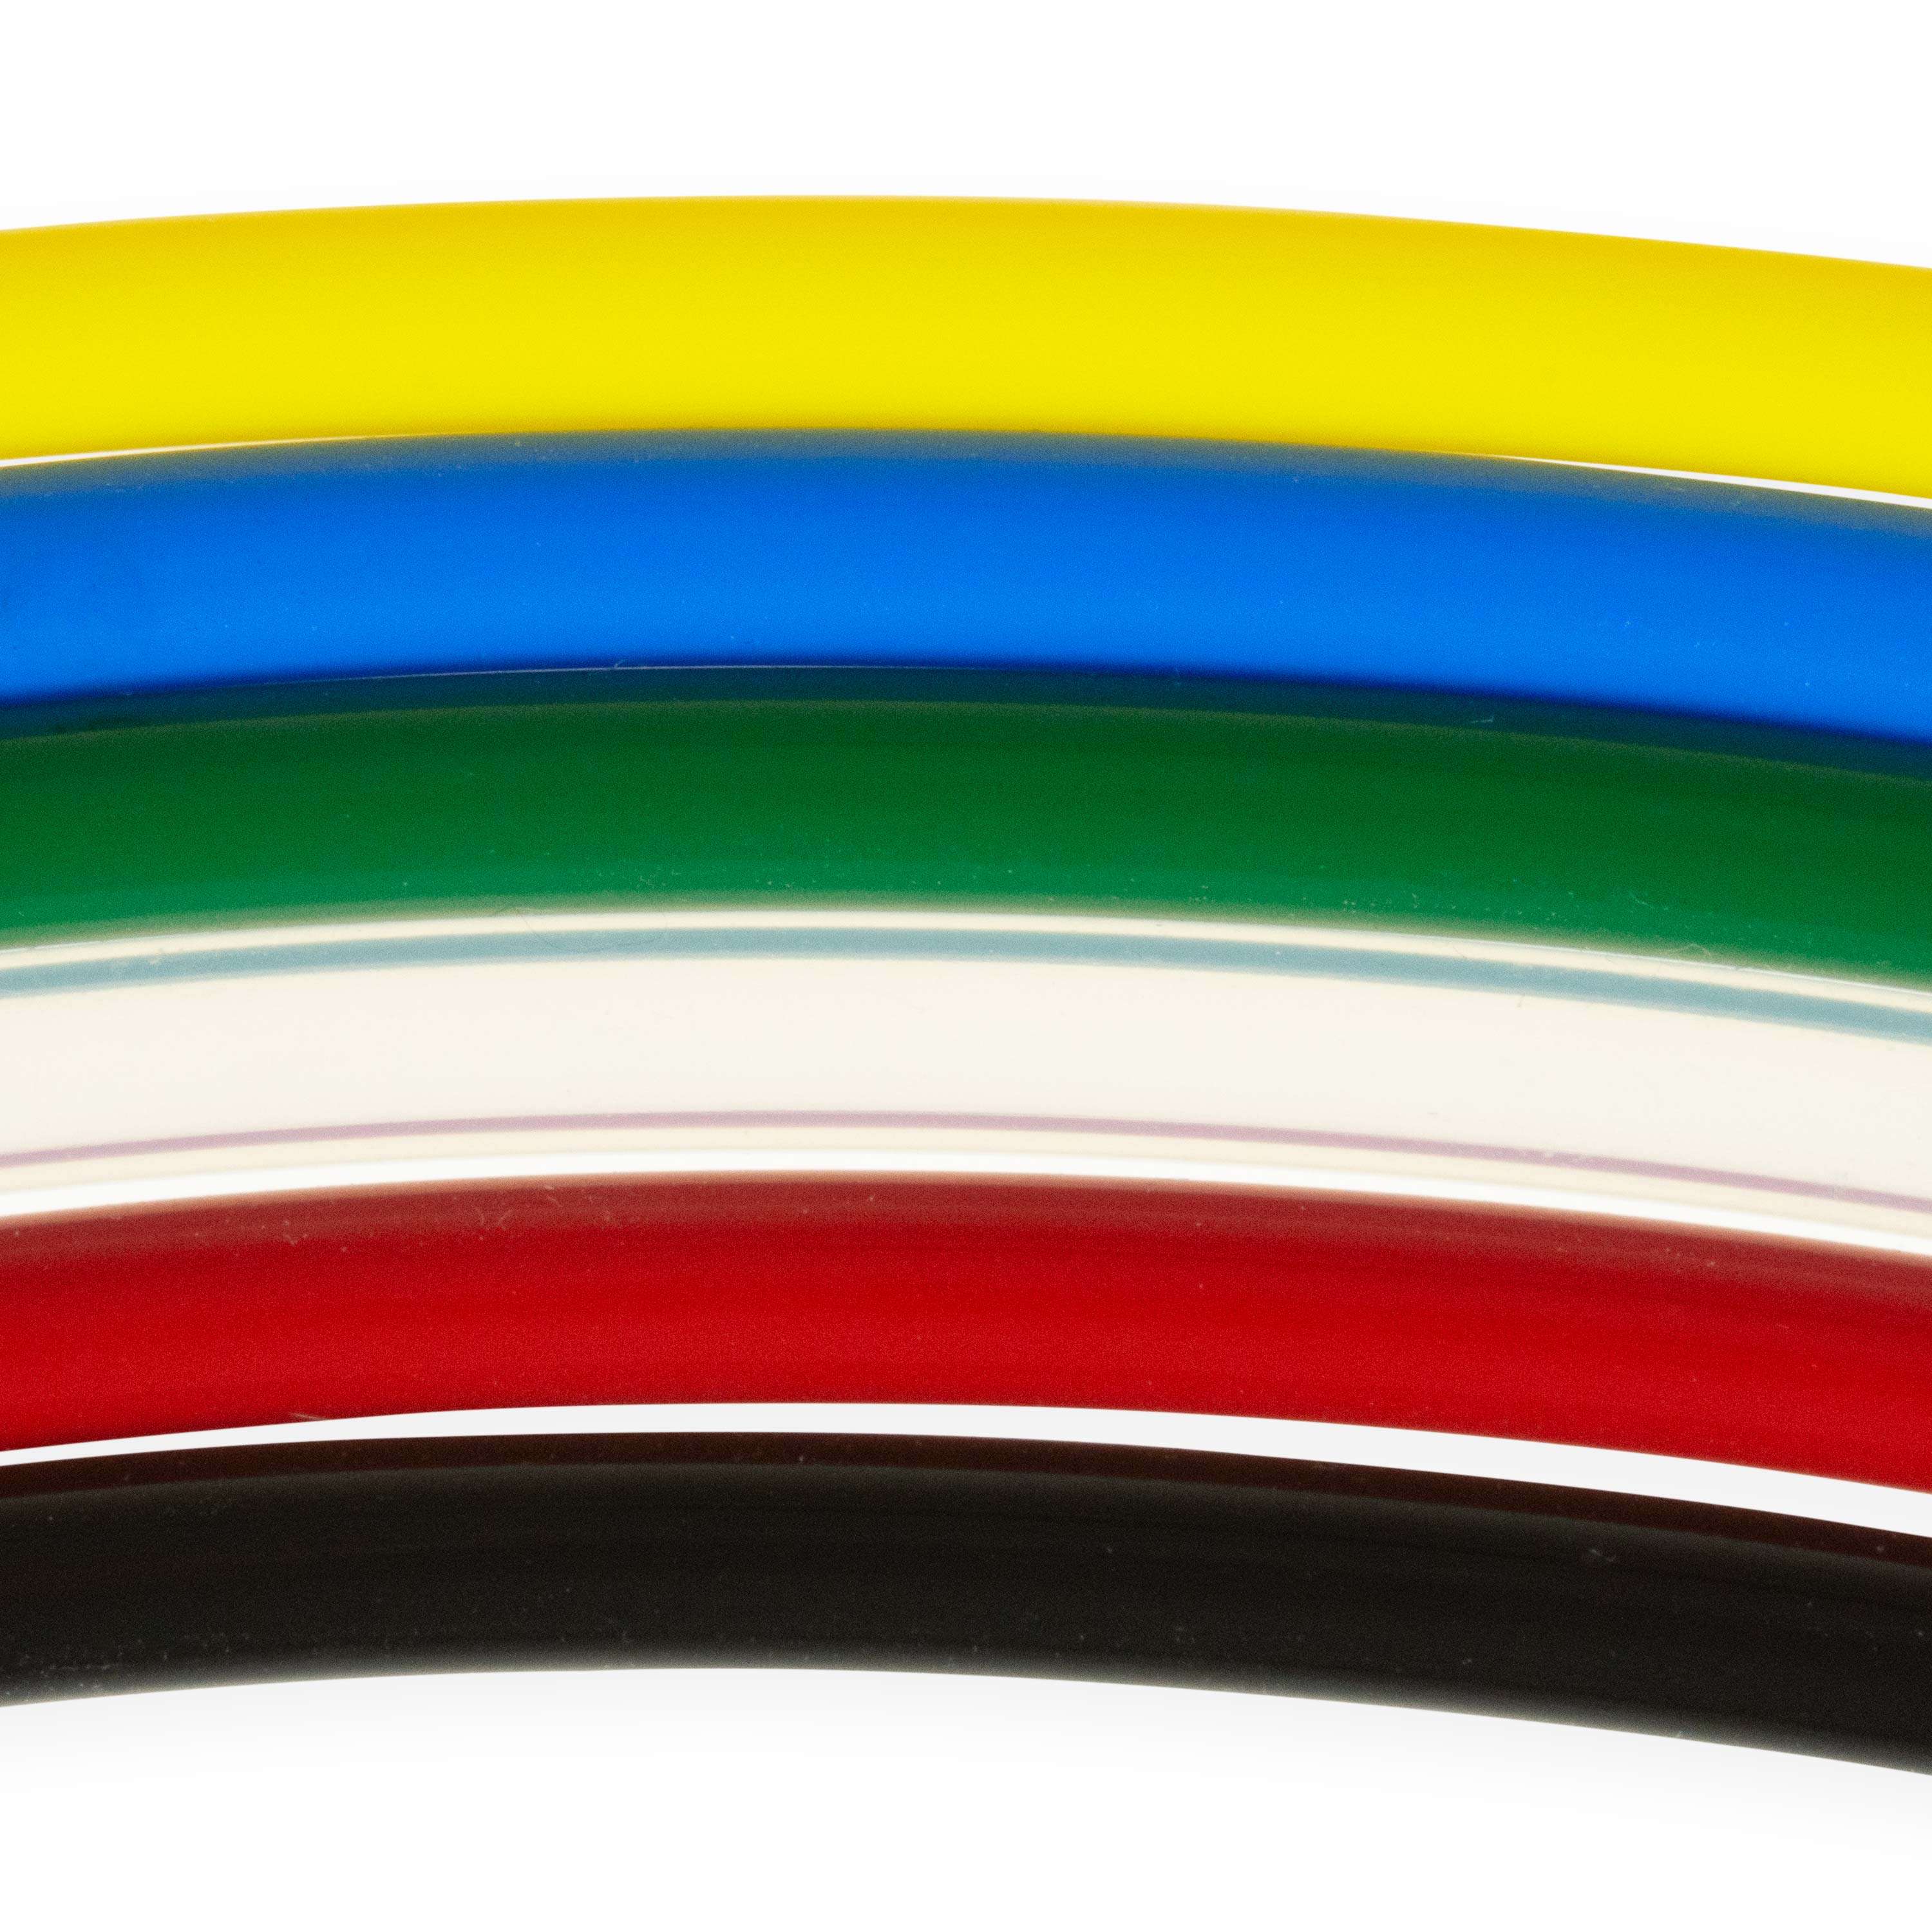 LDPE high pressure hose 6/4 in 6 colours